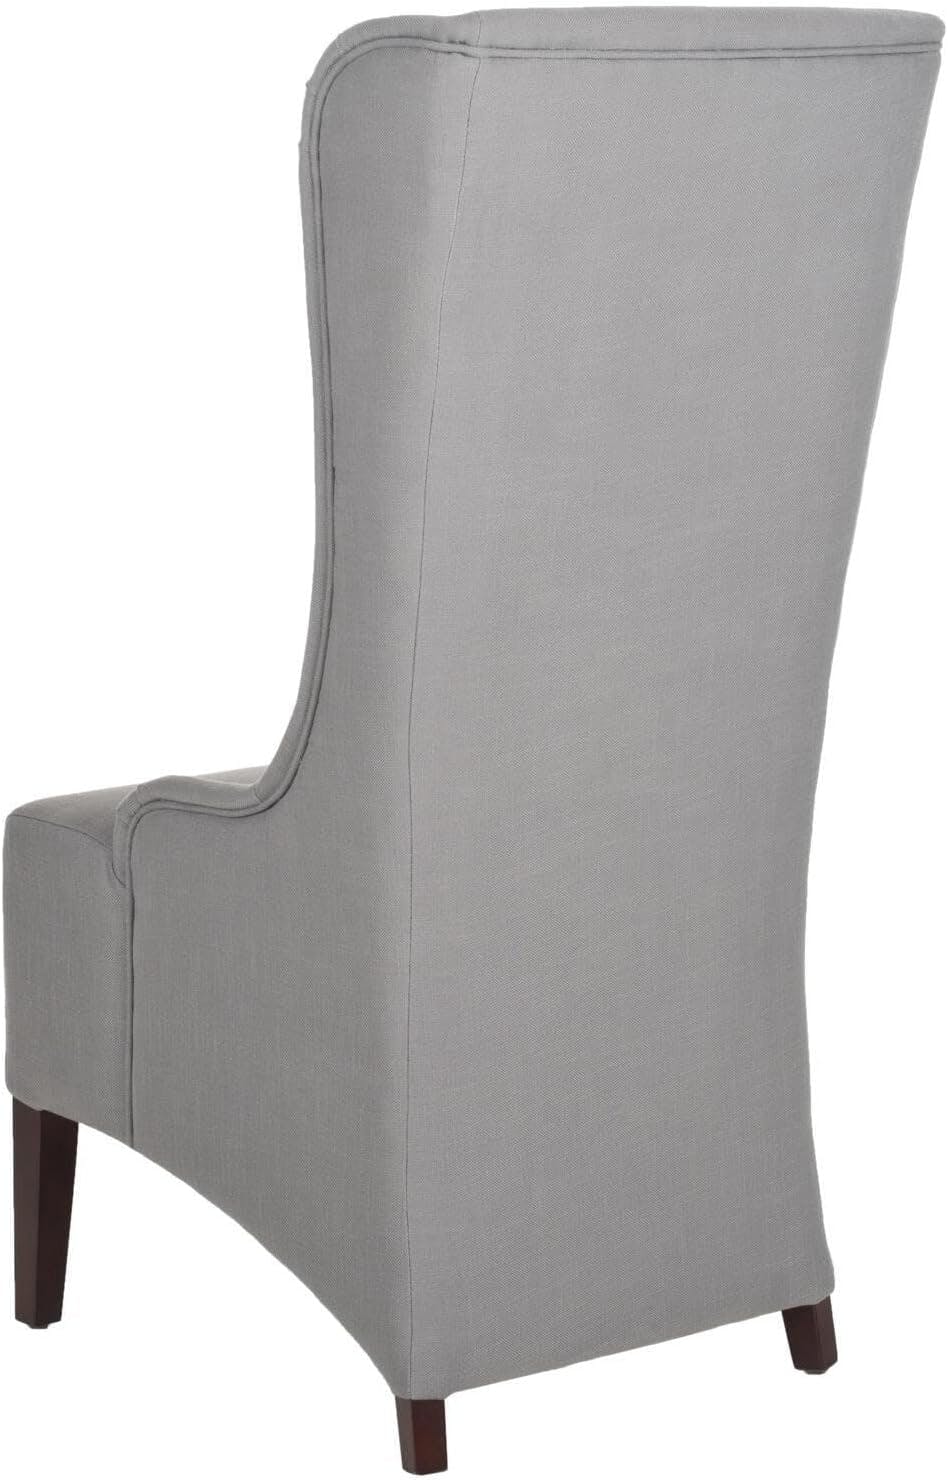 High-Back Arctic Grey Linen Upholstered Side Chair with Cherry Mahogany Legs